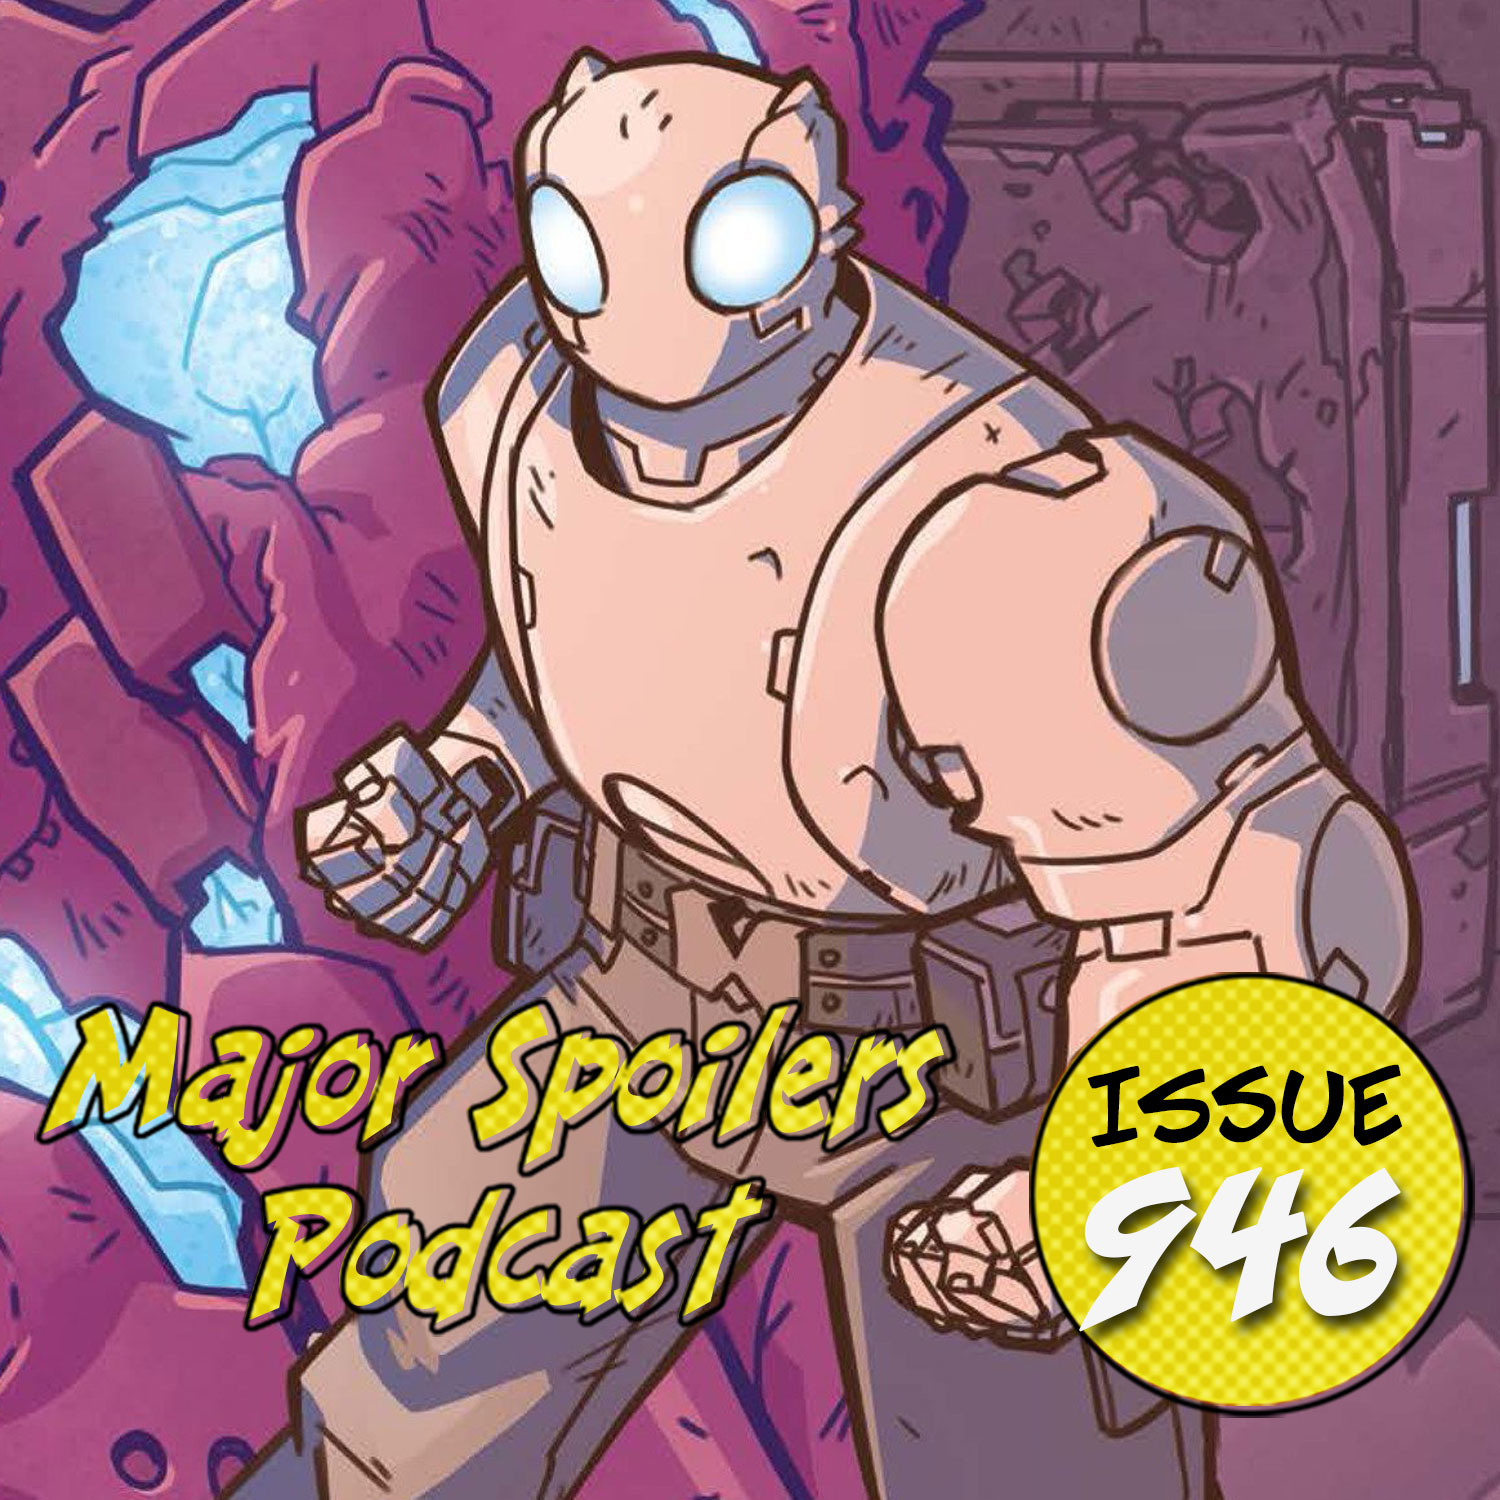 Major Spoilers Podcast #946: Atomic Robo and the Spectre of Tomorrow